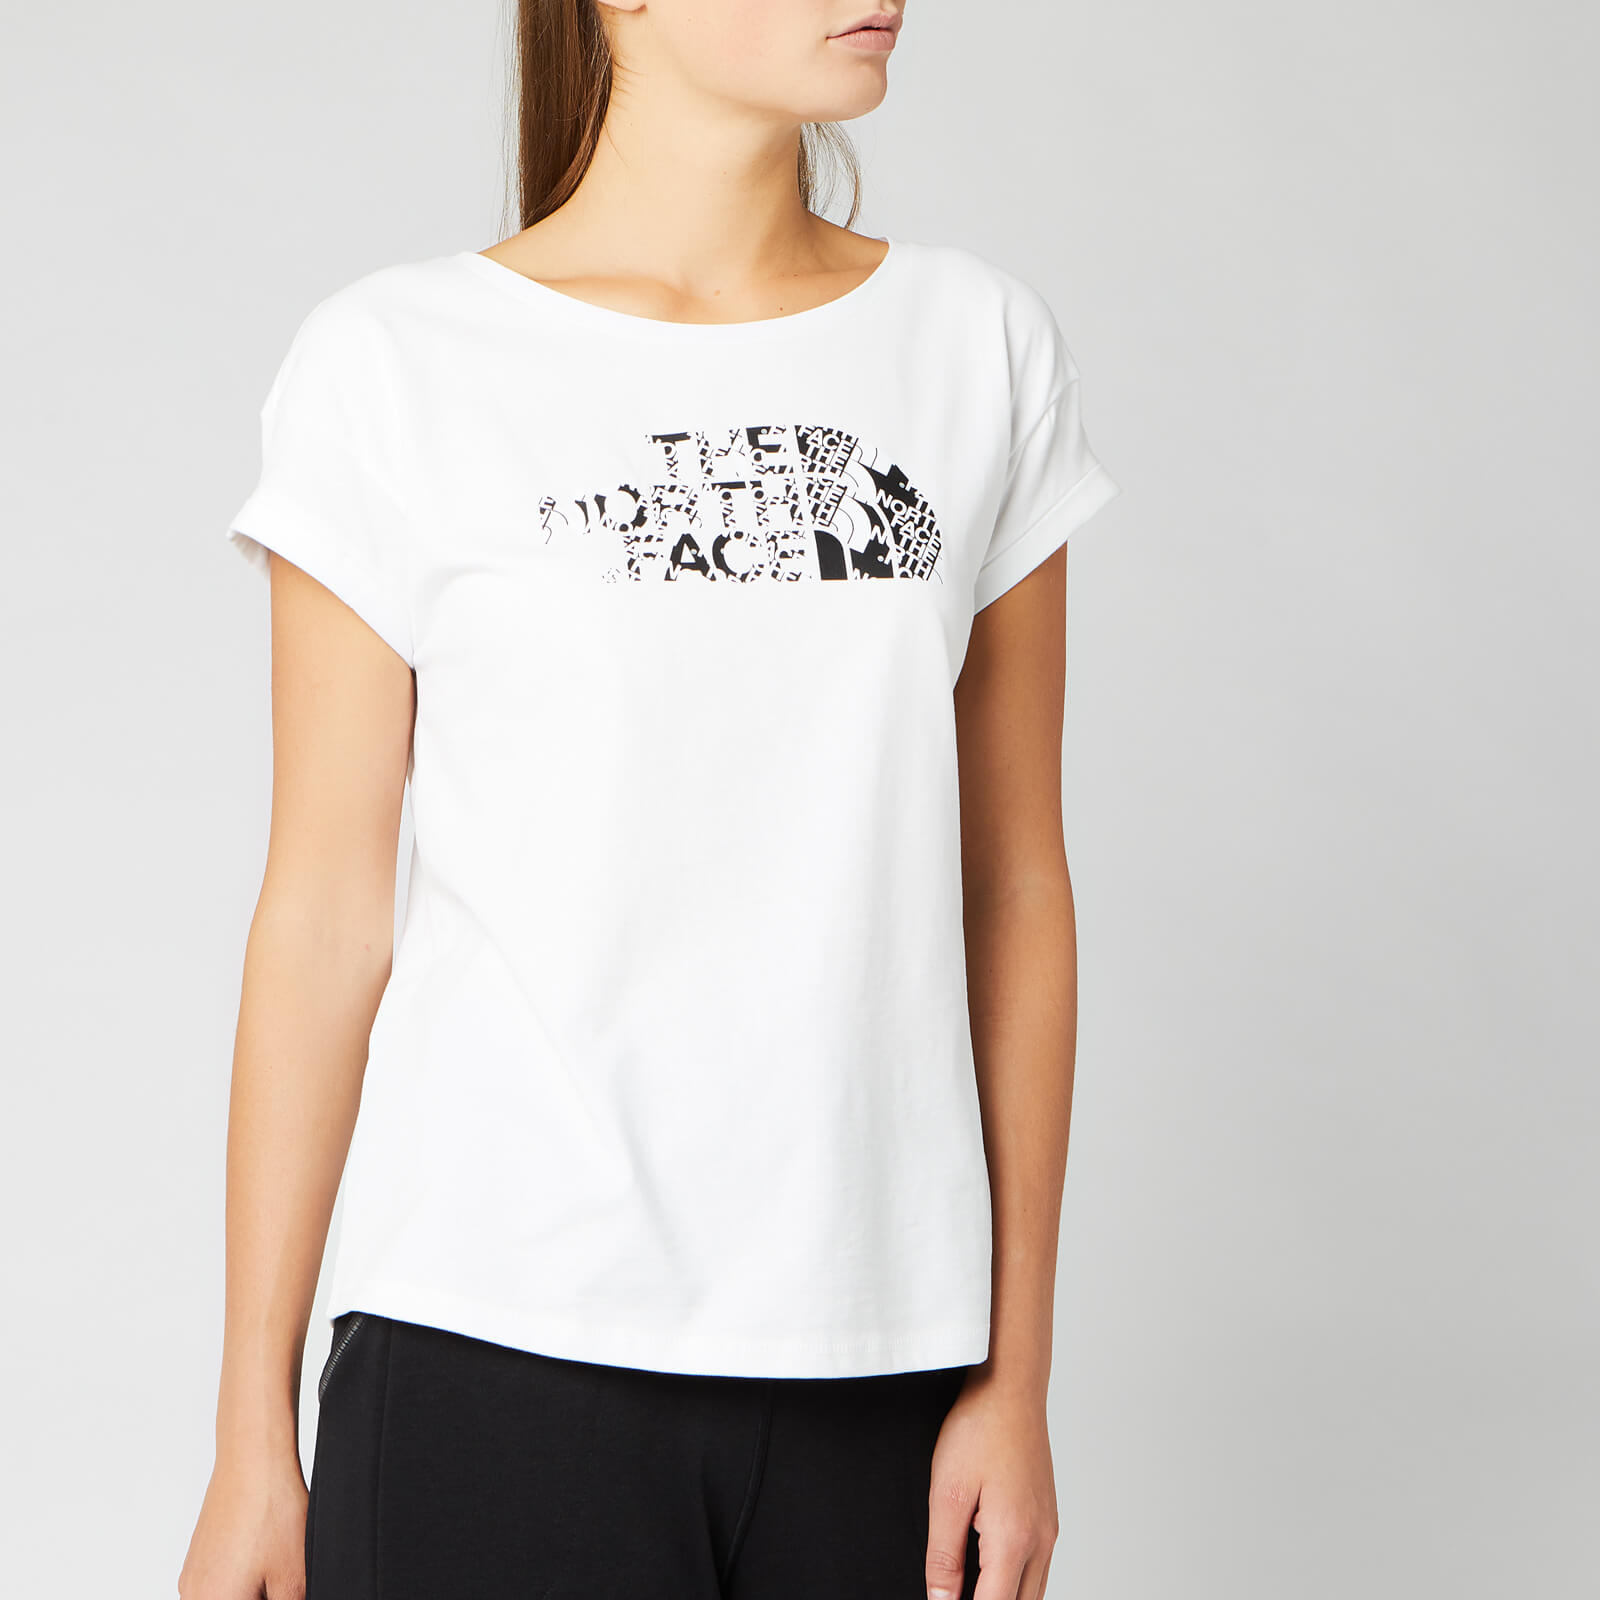 north face t shirts women's